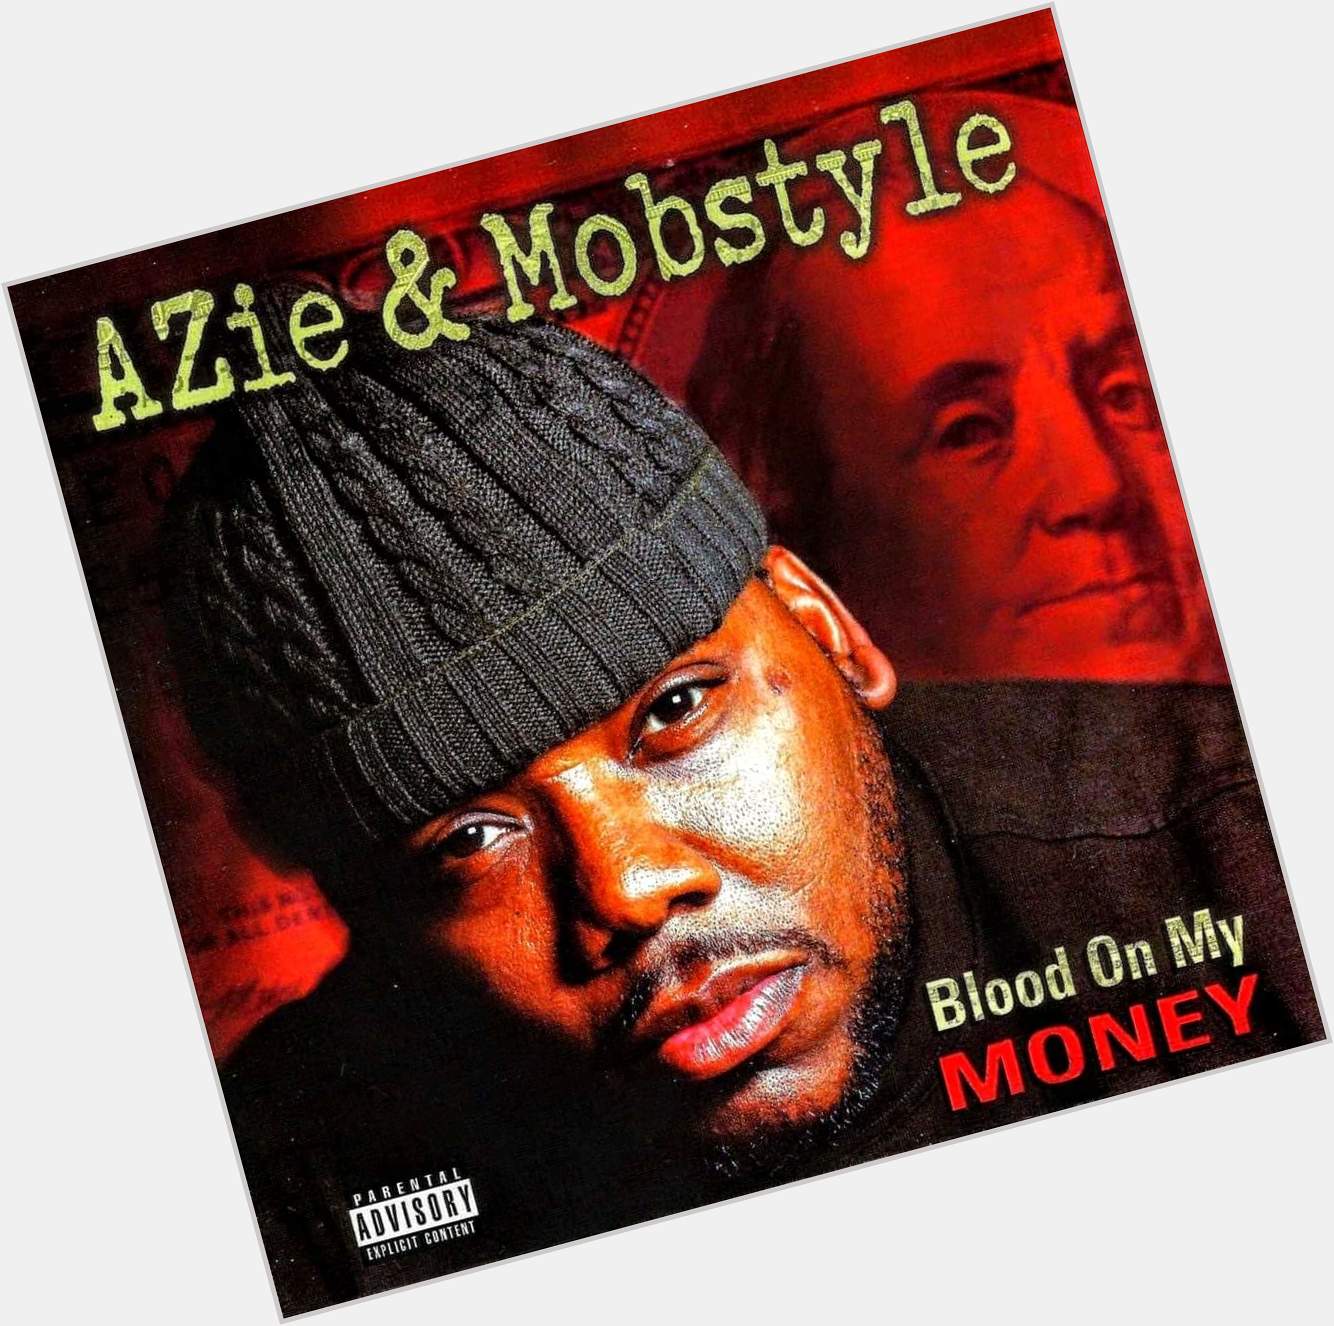 Happy Birthday Azie Faison  AZIE FAISON OF MOBSTYLE  The Real King of NYC from Murder Dog Magazine 